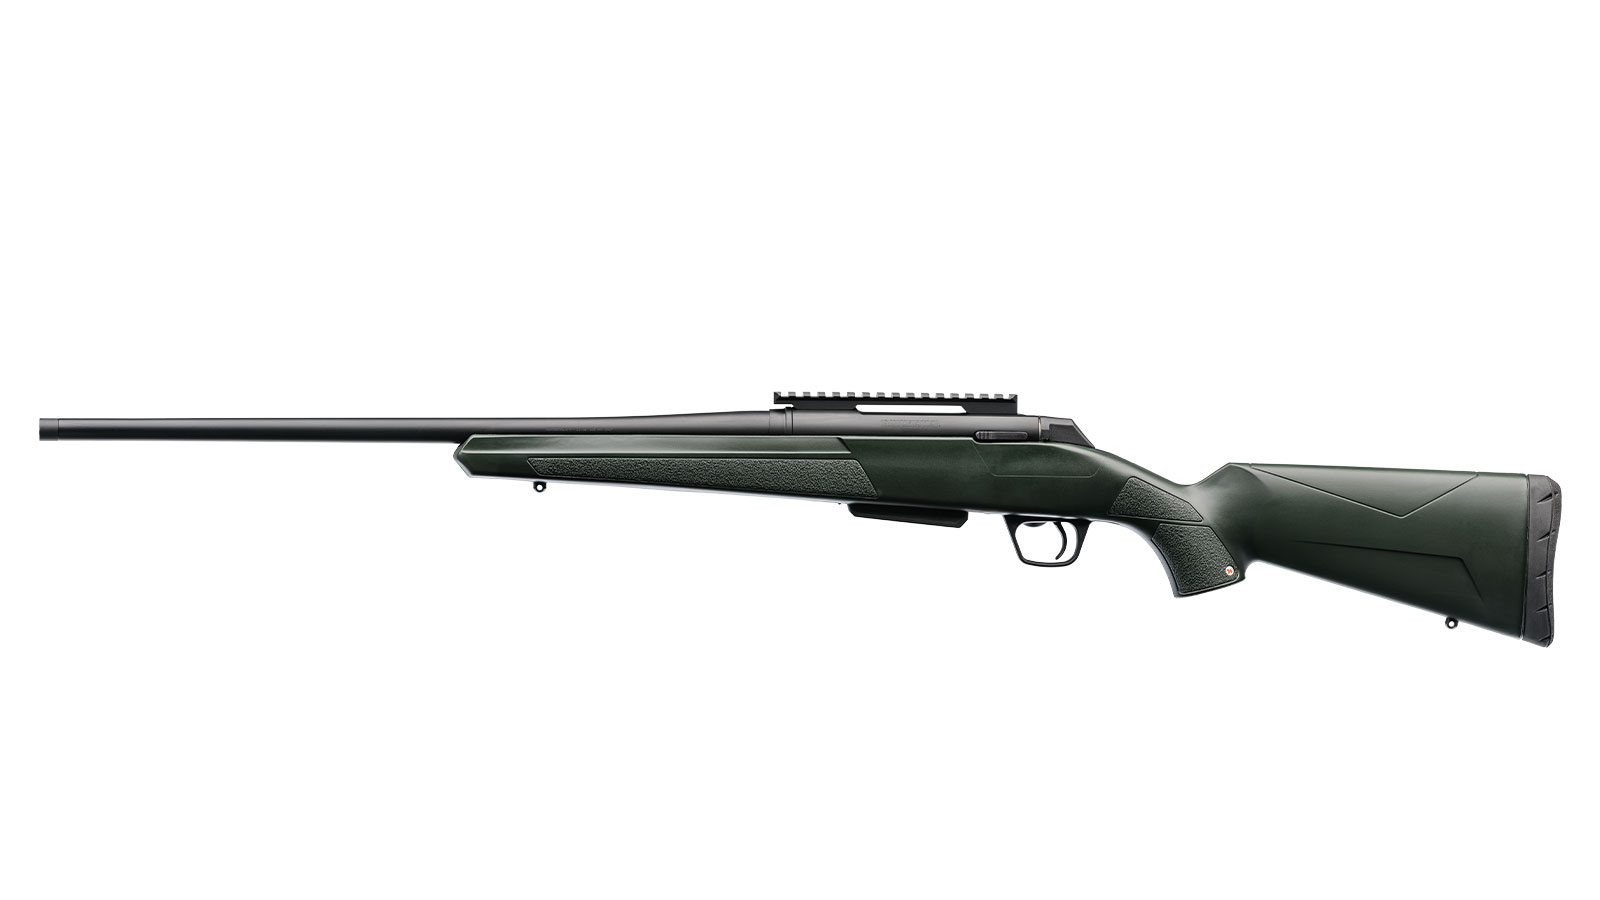 WINCHESTER XPR Stealth Theaded .30-06Spr